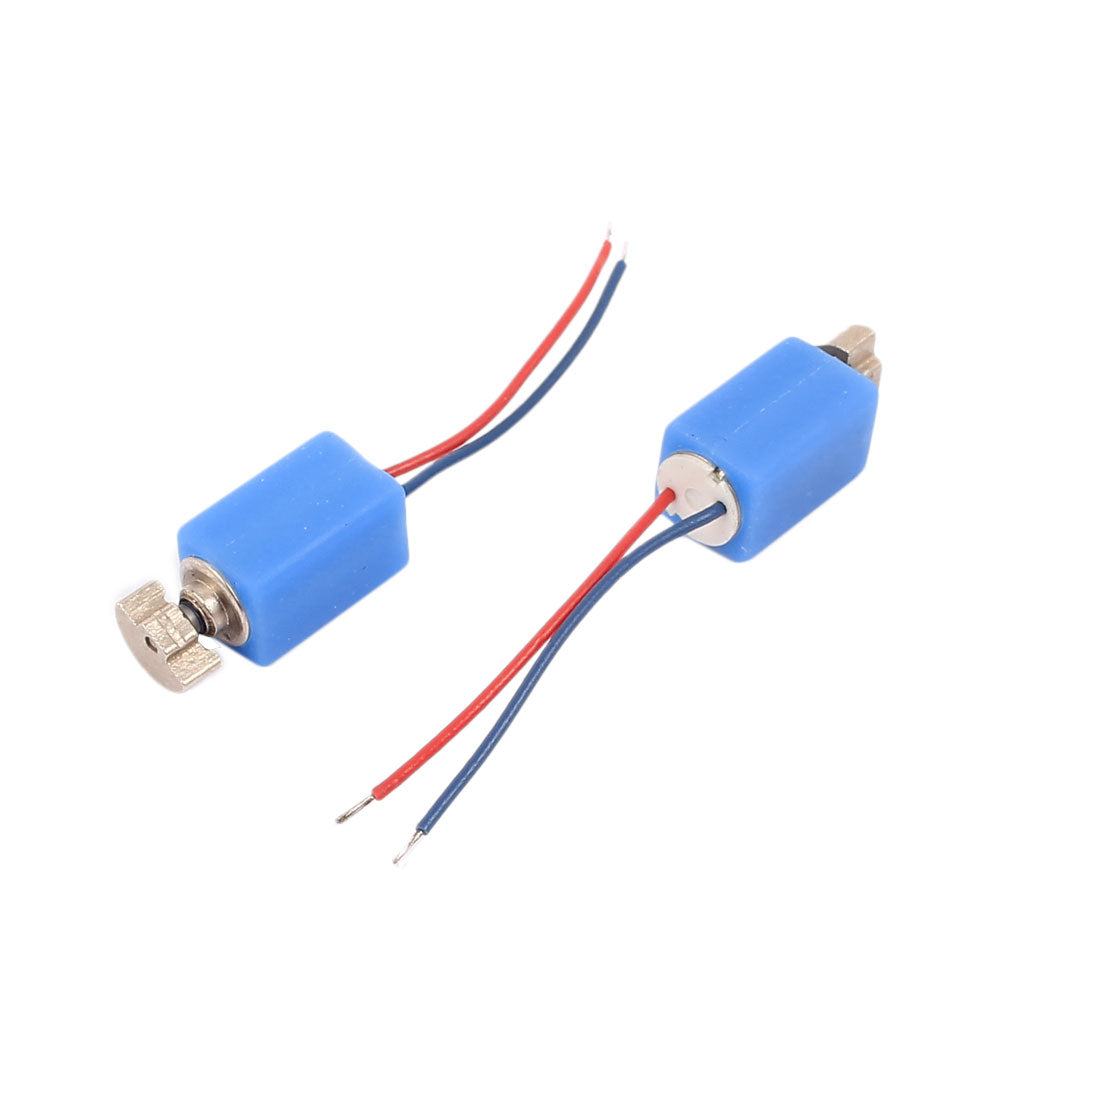 uxcell Uxcell 12 Pcs DC 3V 4 x 8mm 3500RPM Mini Vibration Motor Blue for Cell Phone